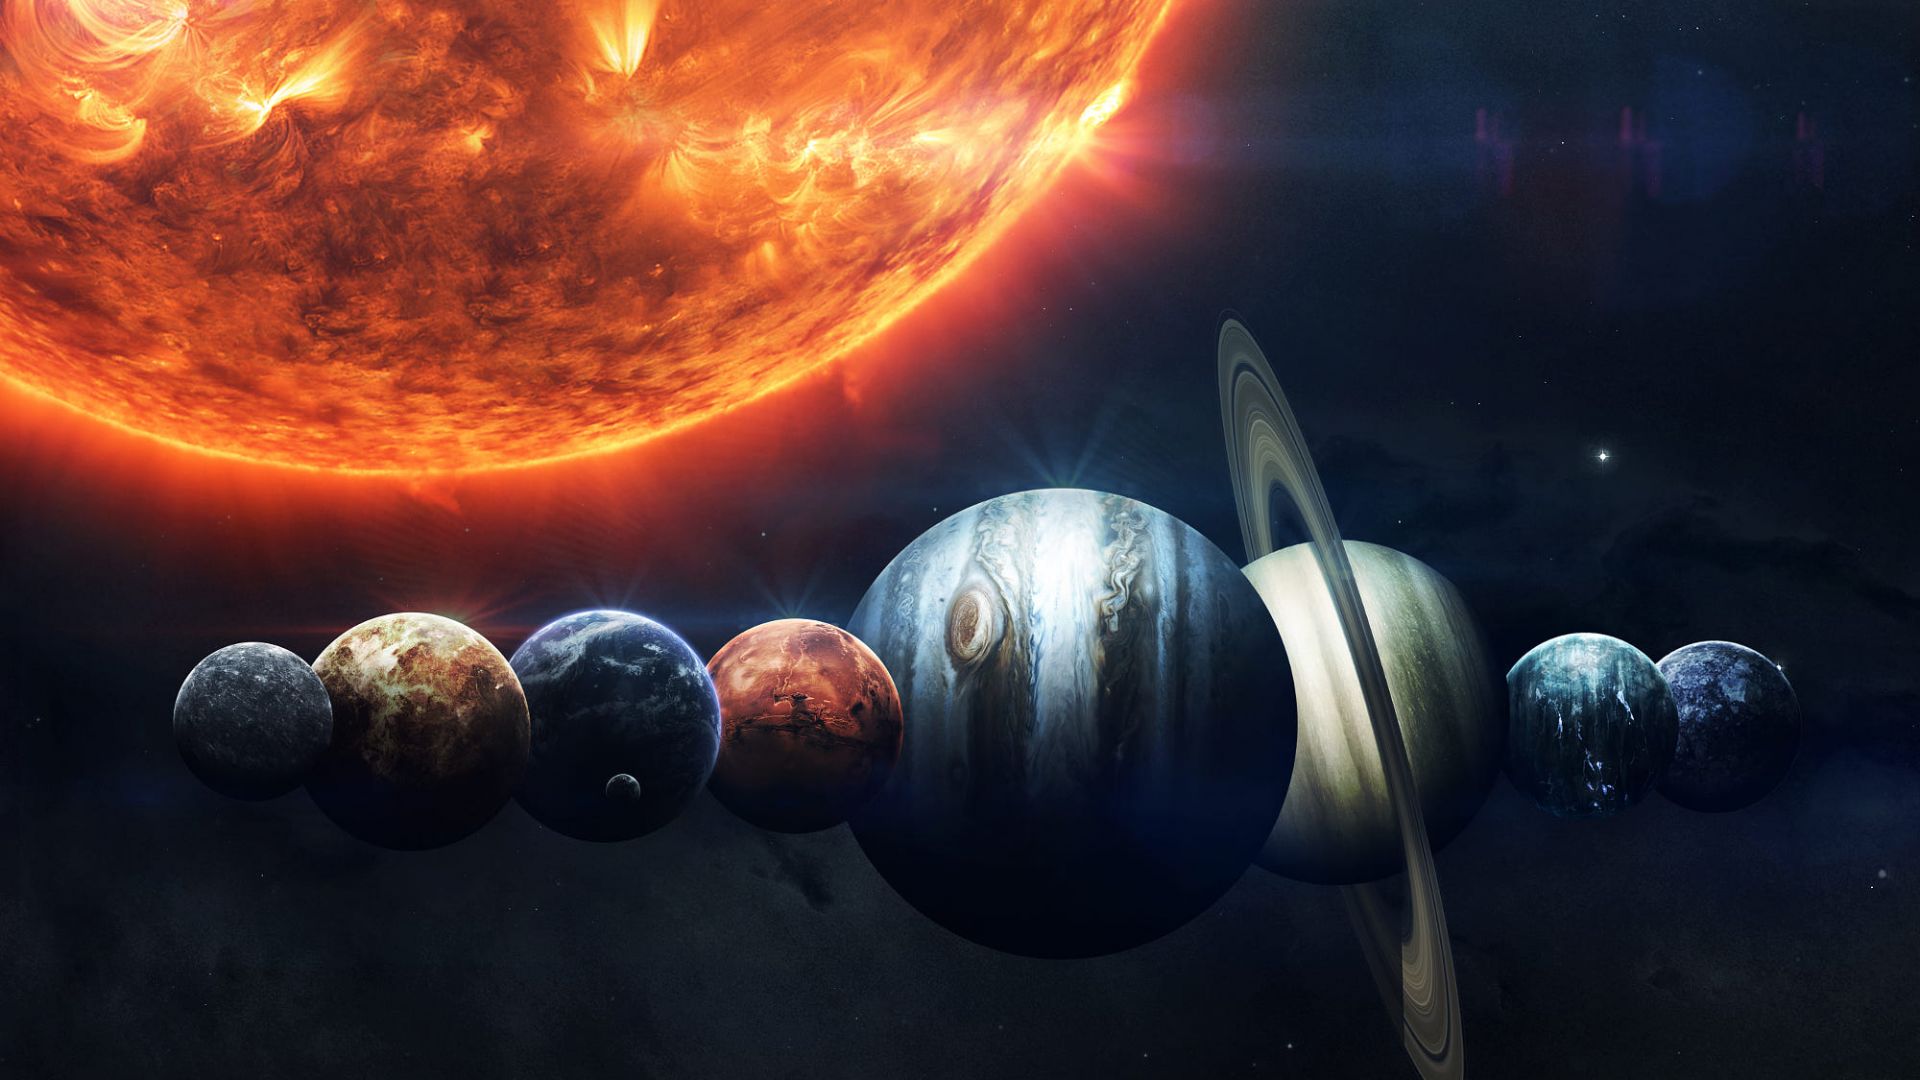 Planet Hd Wallpapers